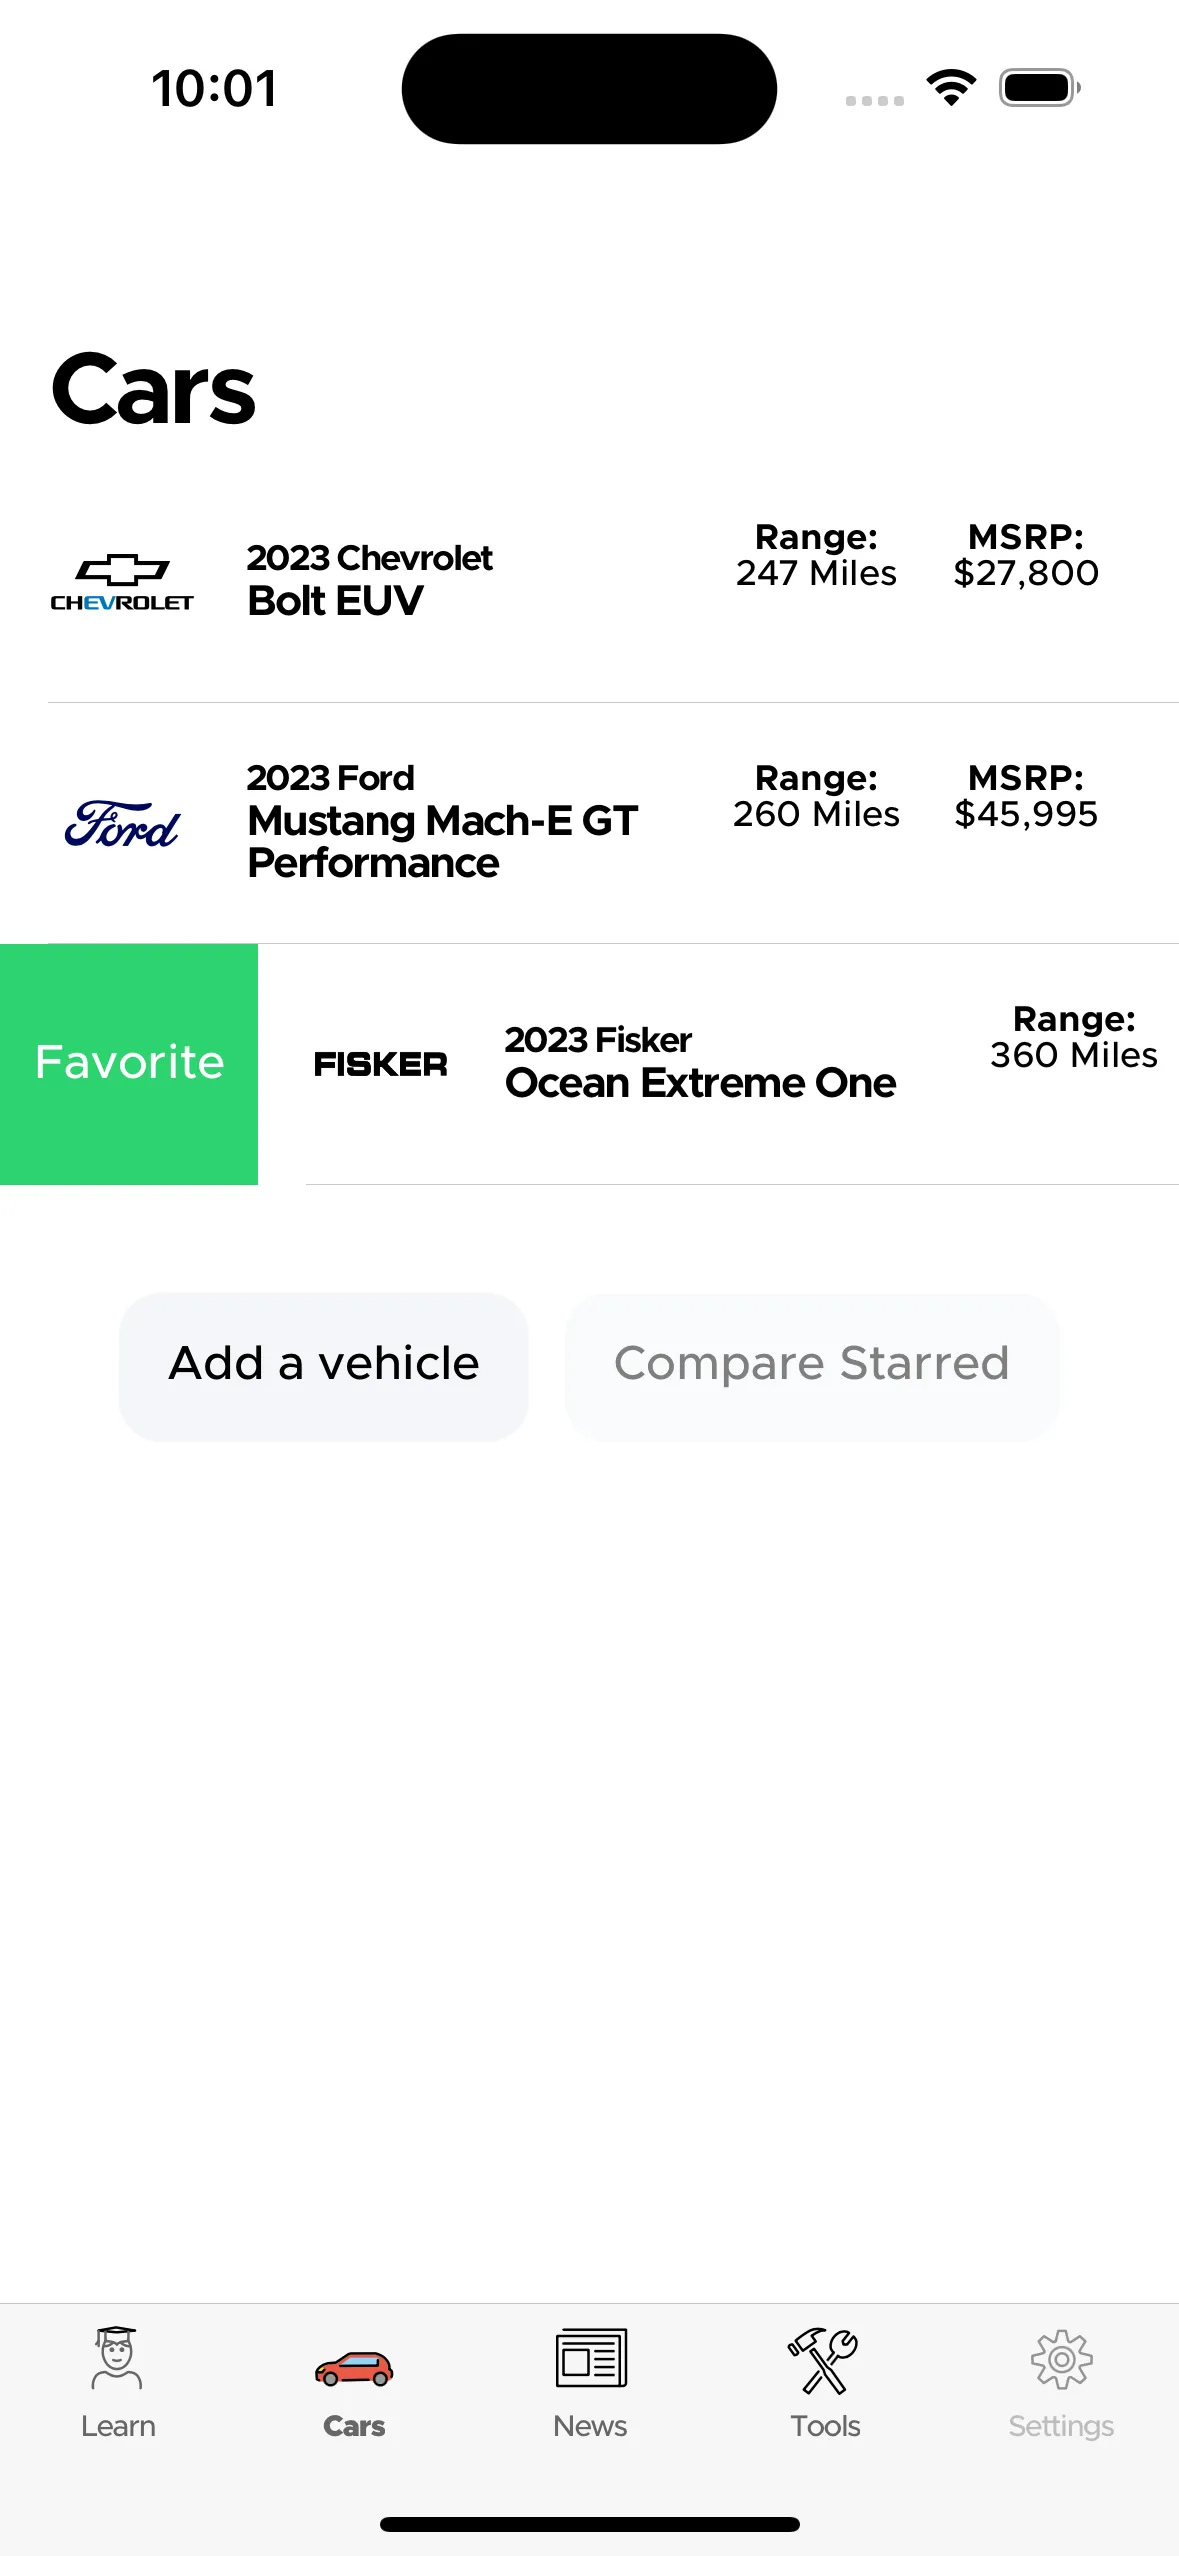 Cars section of the Hello EV app listing different electric vehicle models like the Chevrolet Bolt EUV and Fisker Ocean Extreme One, with options to add or compare vehicles.